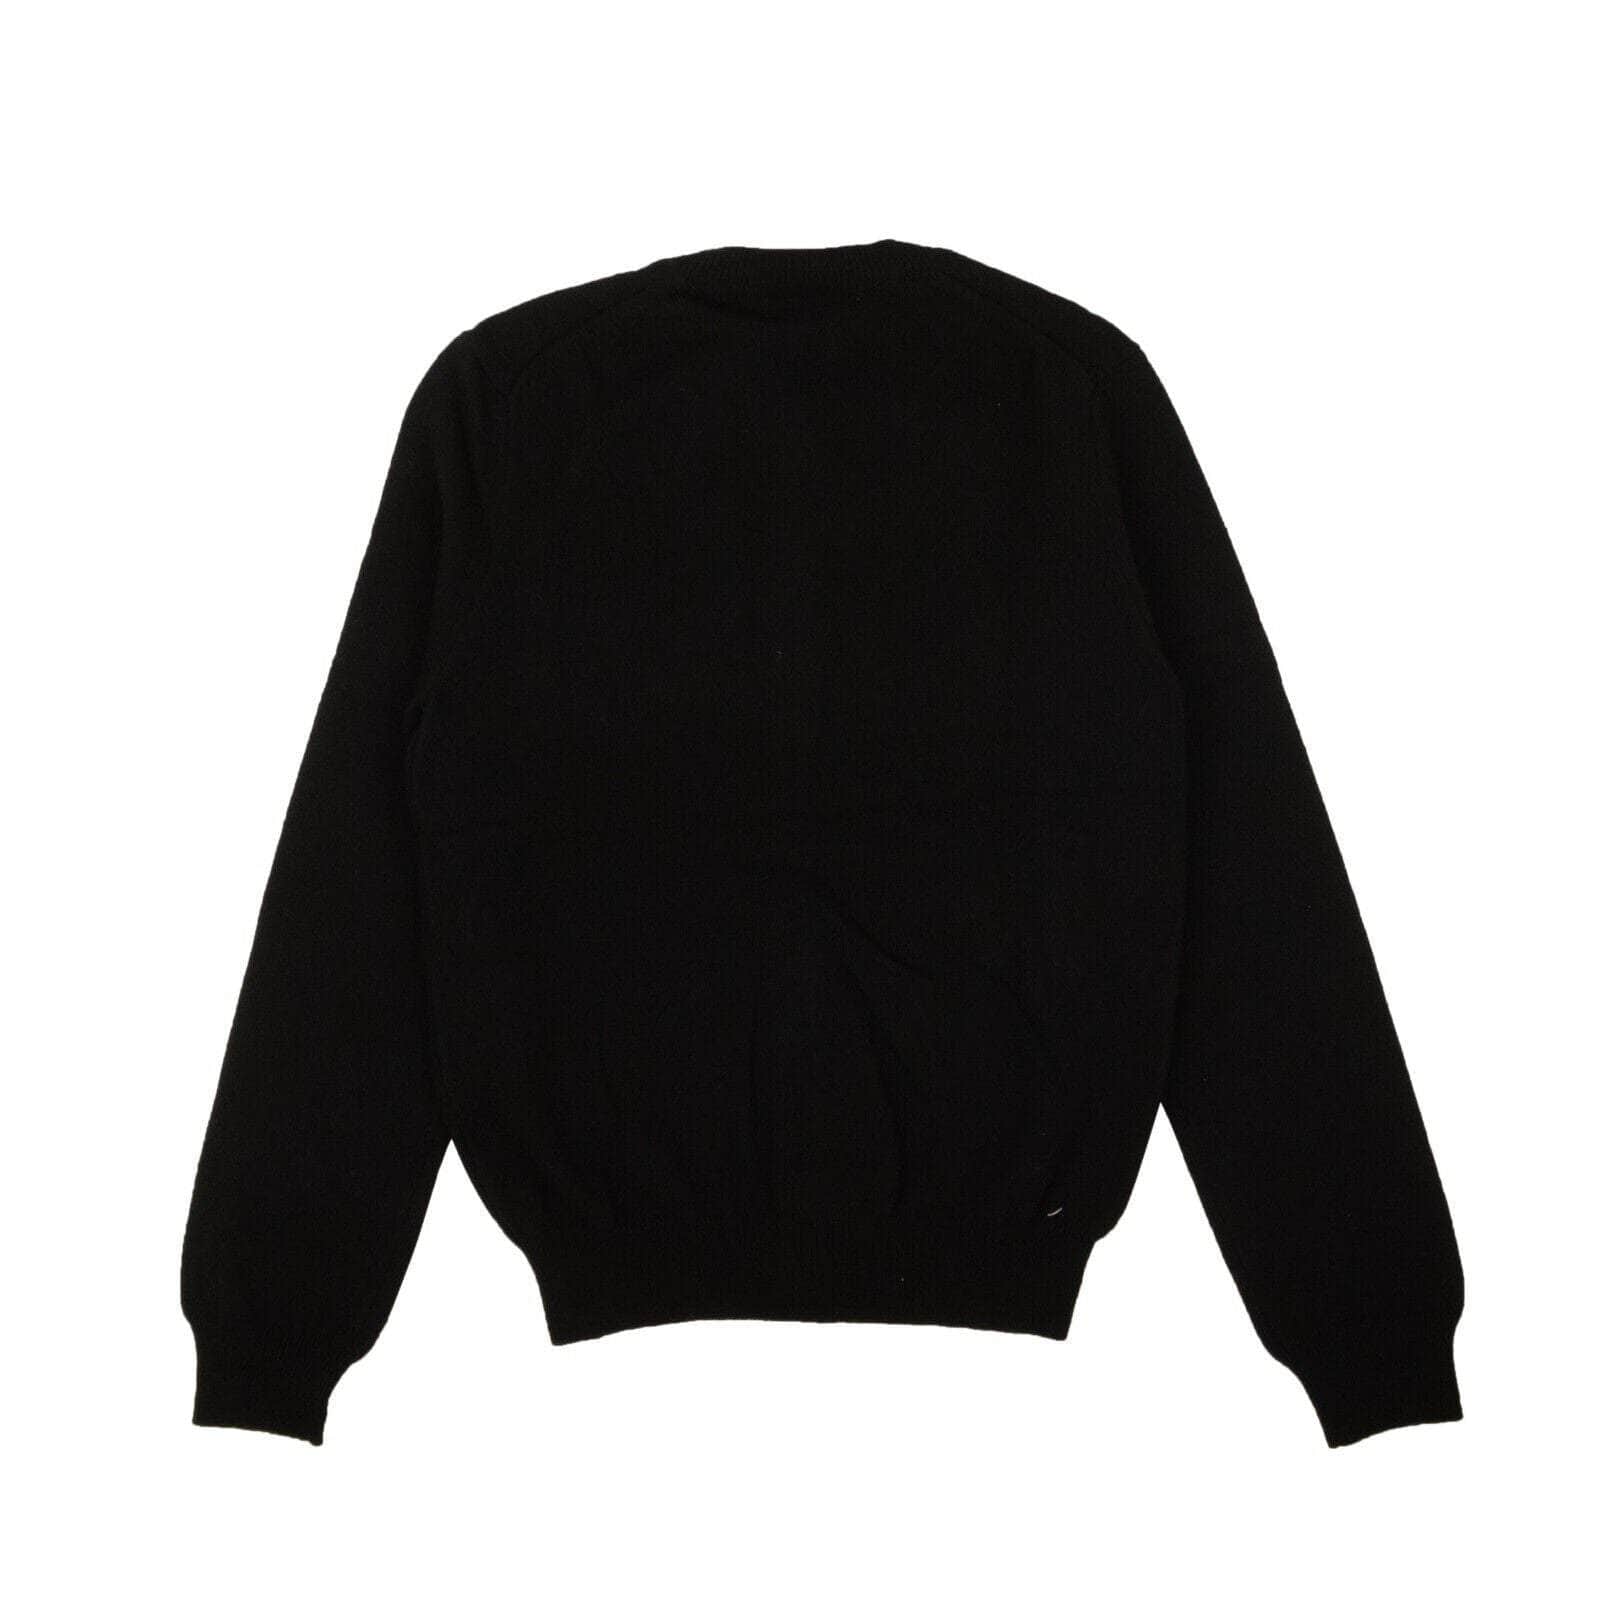 Comme Des Garcons Play 250-500, channelenable-all, chicmi, couponcollection, gender-womens, main-clothing, size-m, womens-cardigans M / 95-CDP-1063/M Black Knit Logo Heart Cardigan 95-CDP-1063/M 95-CDP-1063/M